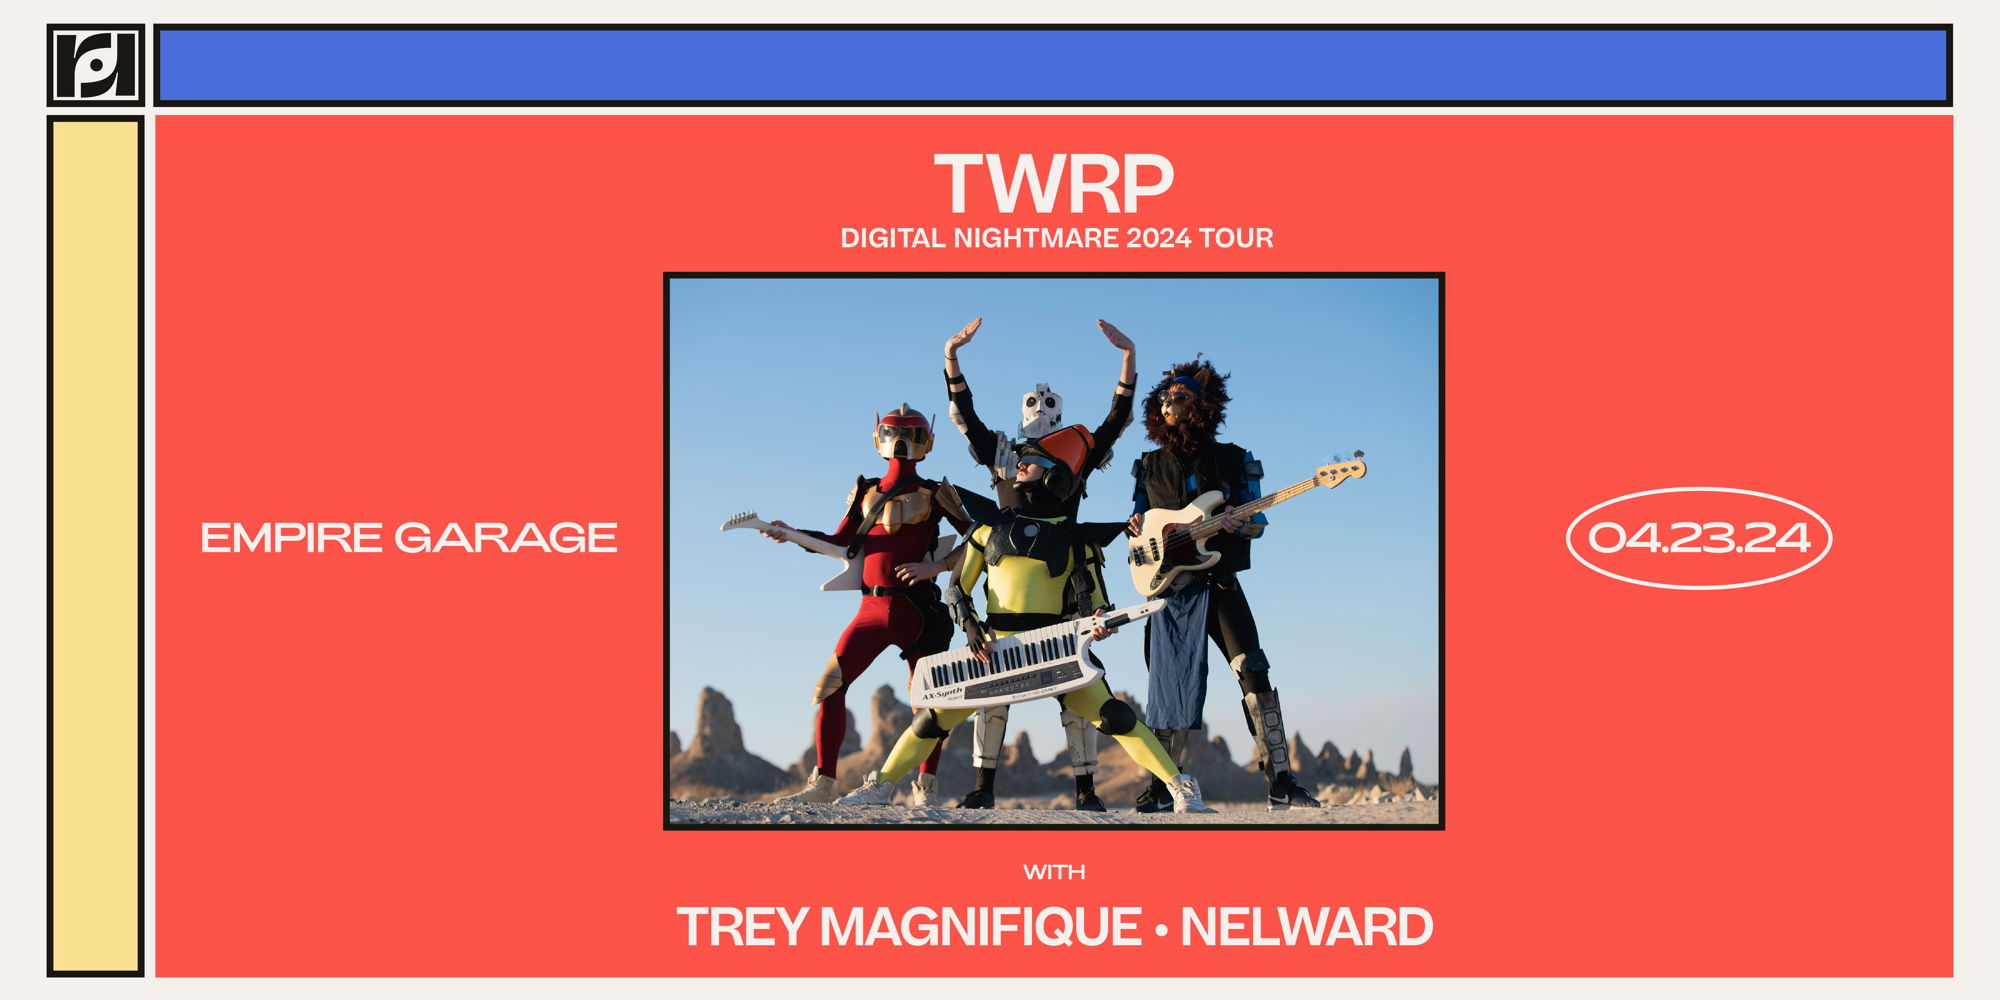 Resound Presents: TWRP Digital Nightmare 2024 Tour  w/ Trey Magnifique and Nelward at Empire Garage promotional image